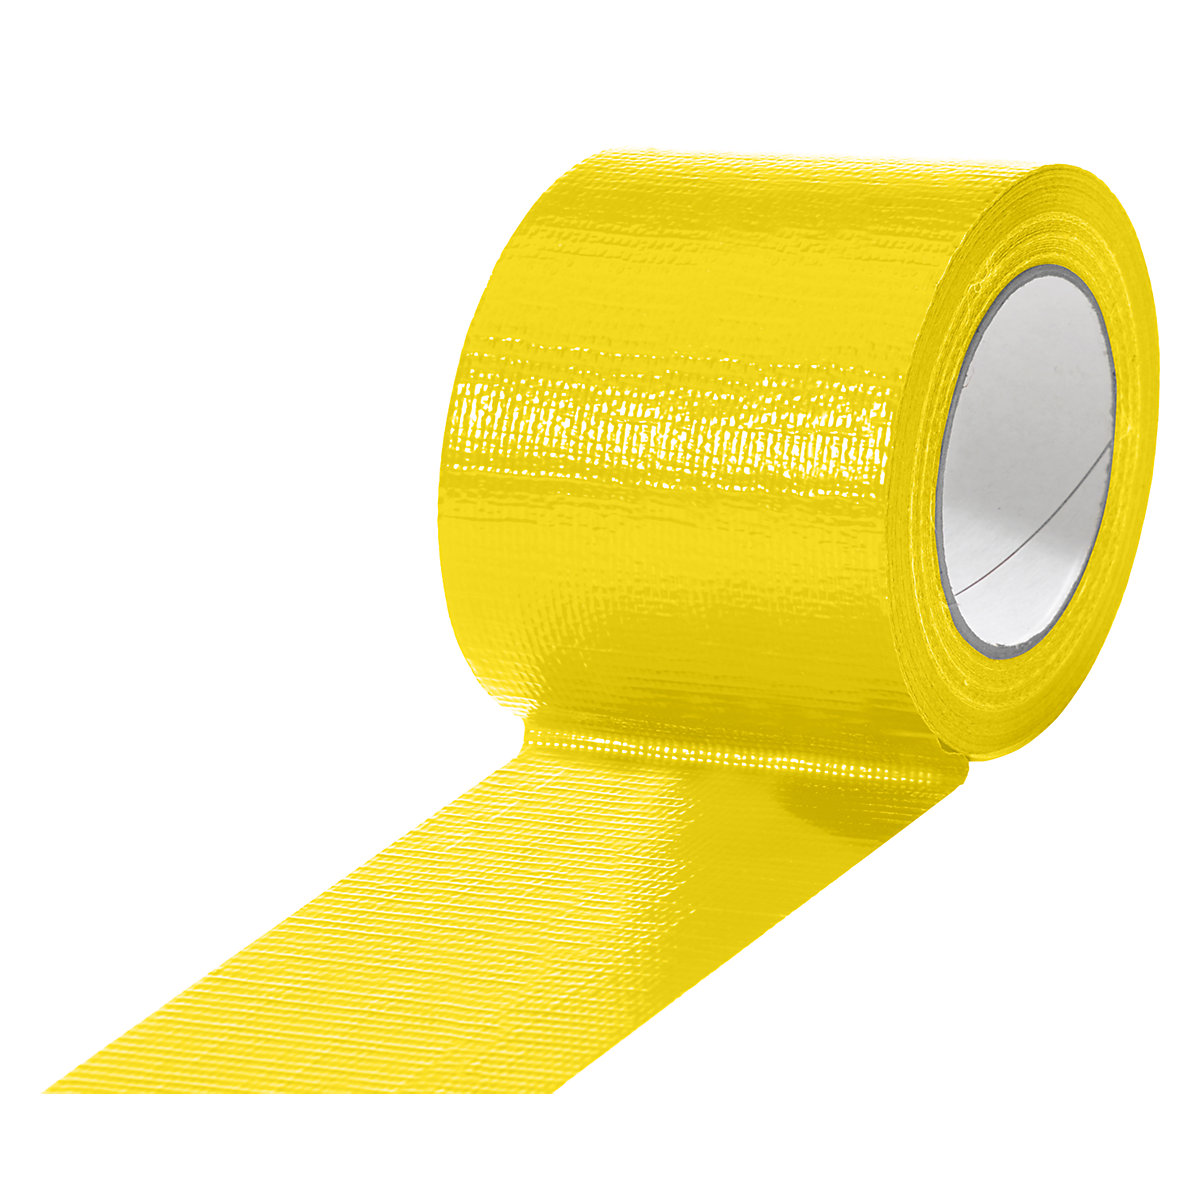 Fabric tape, in different colours, pack of 12 rolls, yellow, tape width 75 mm-18